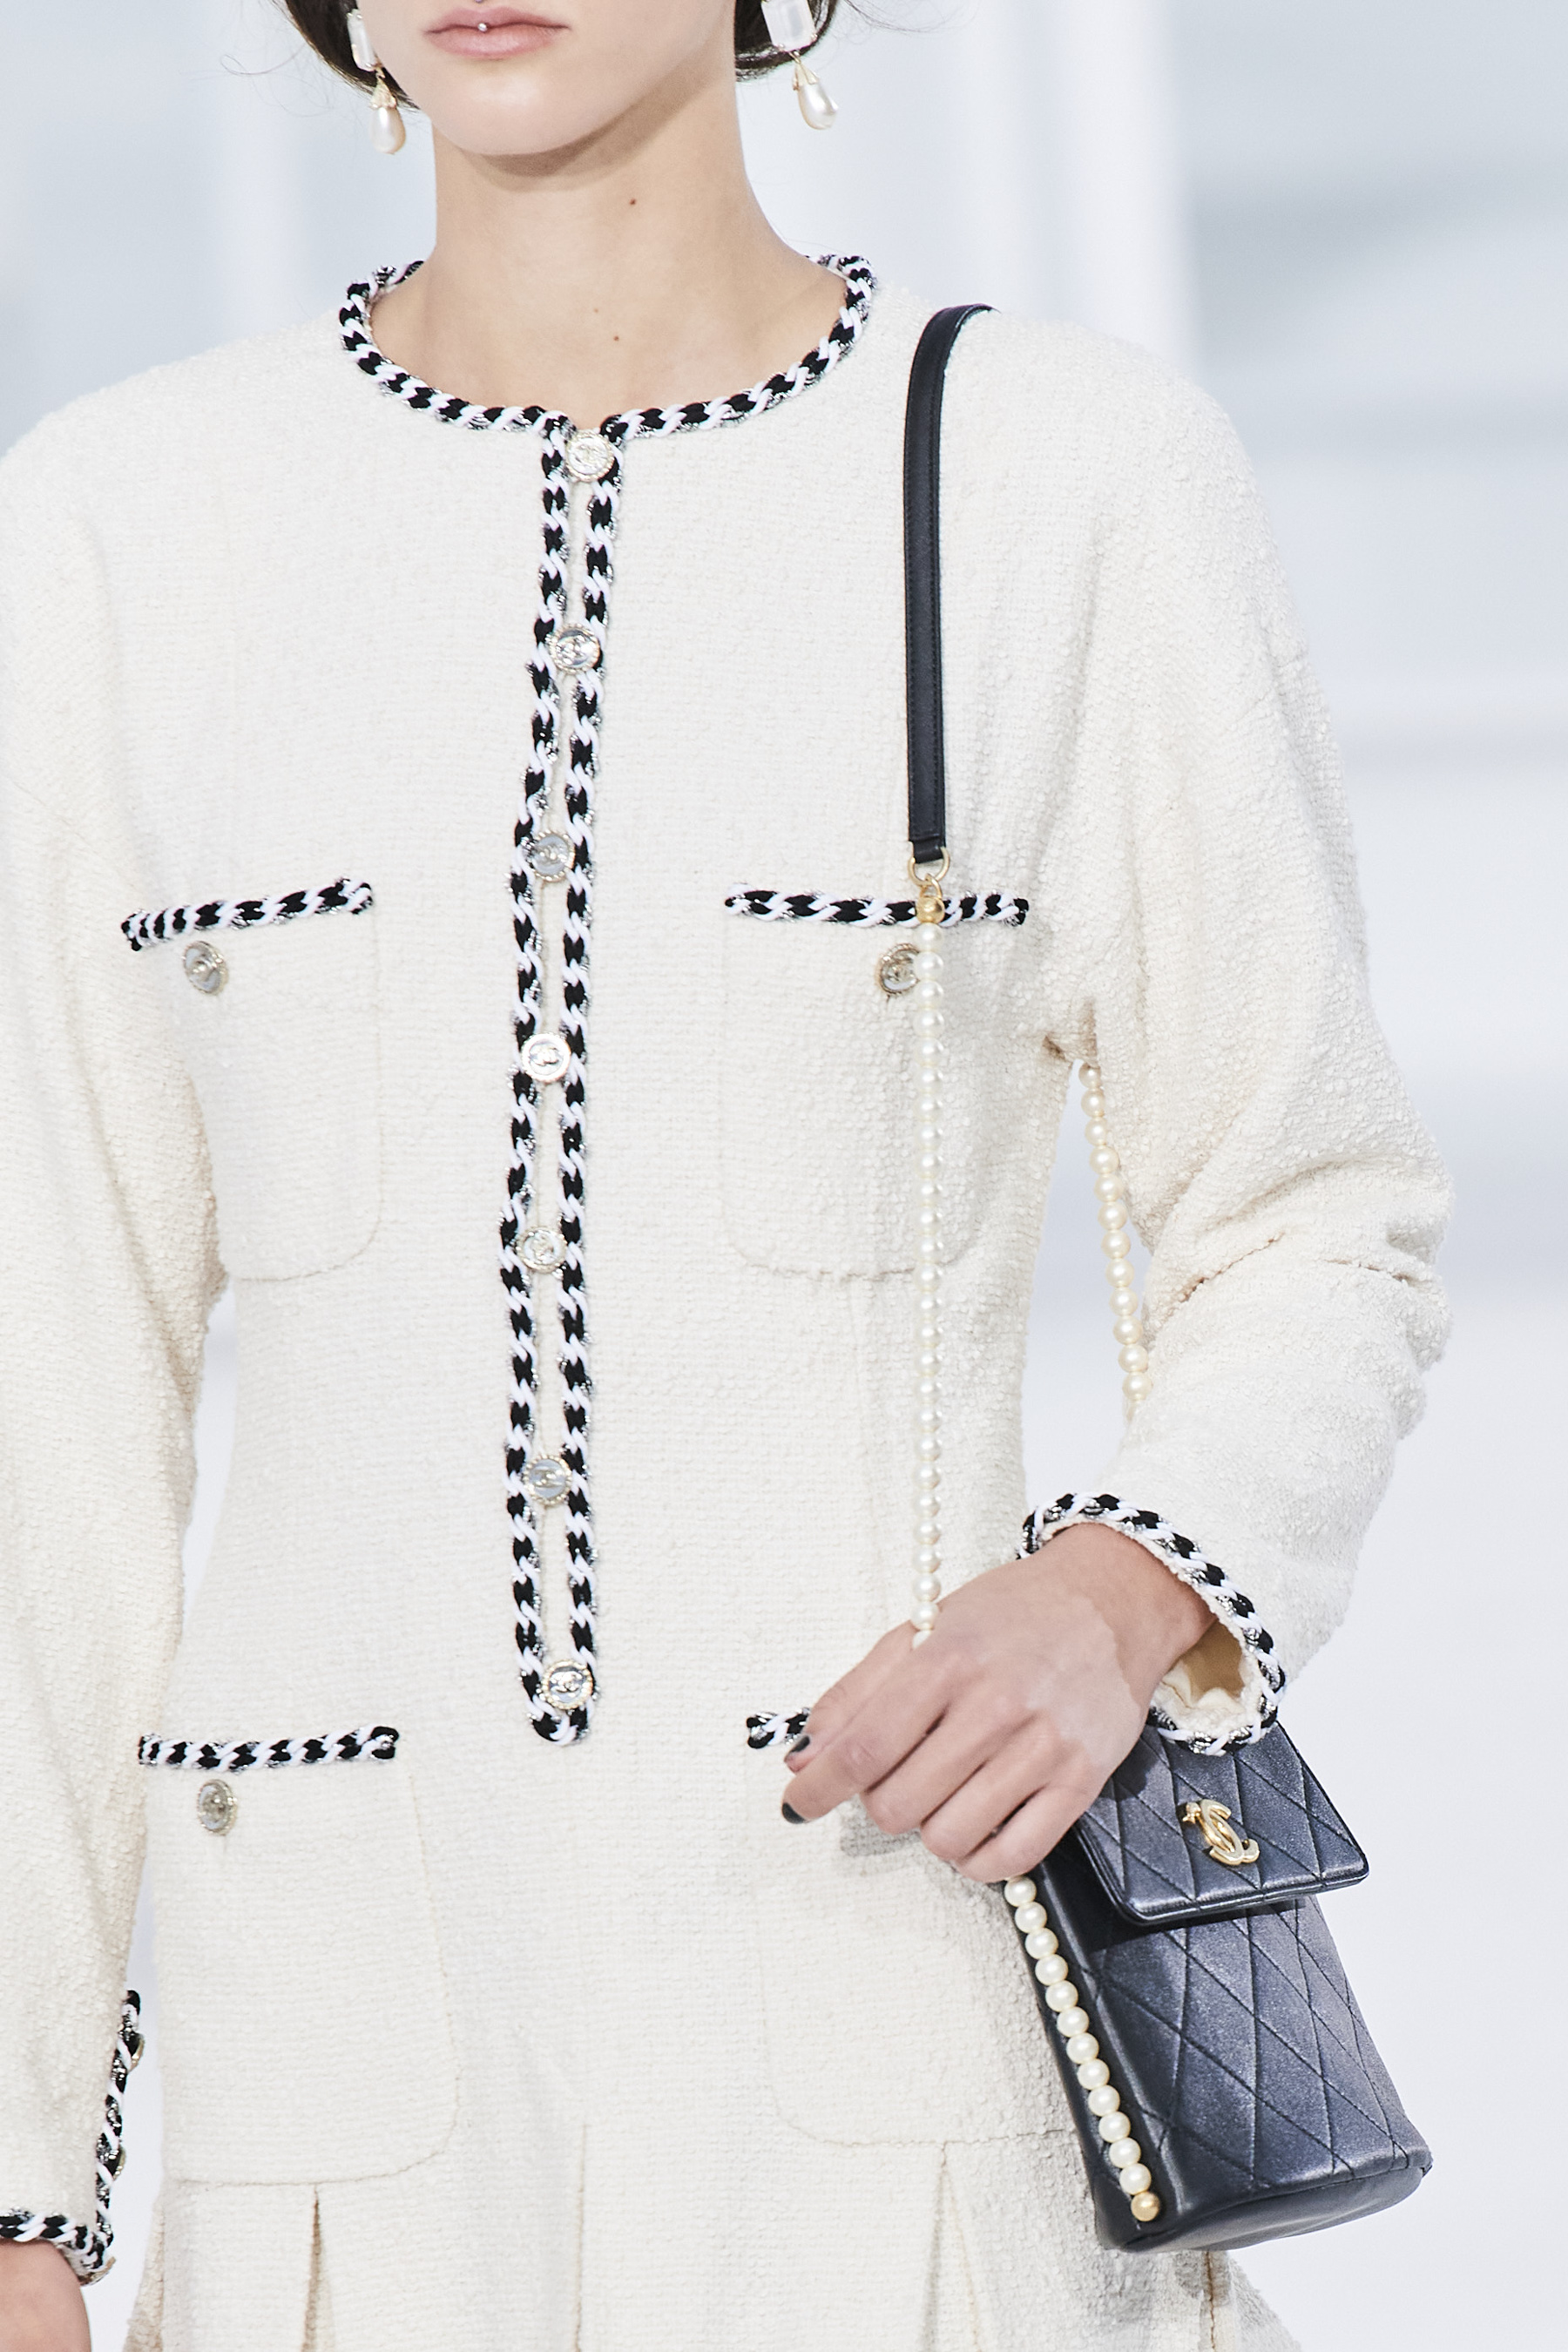 Chanel Spring 2021 Fashion Show Details | The Impression